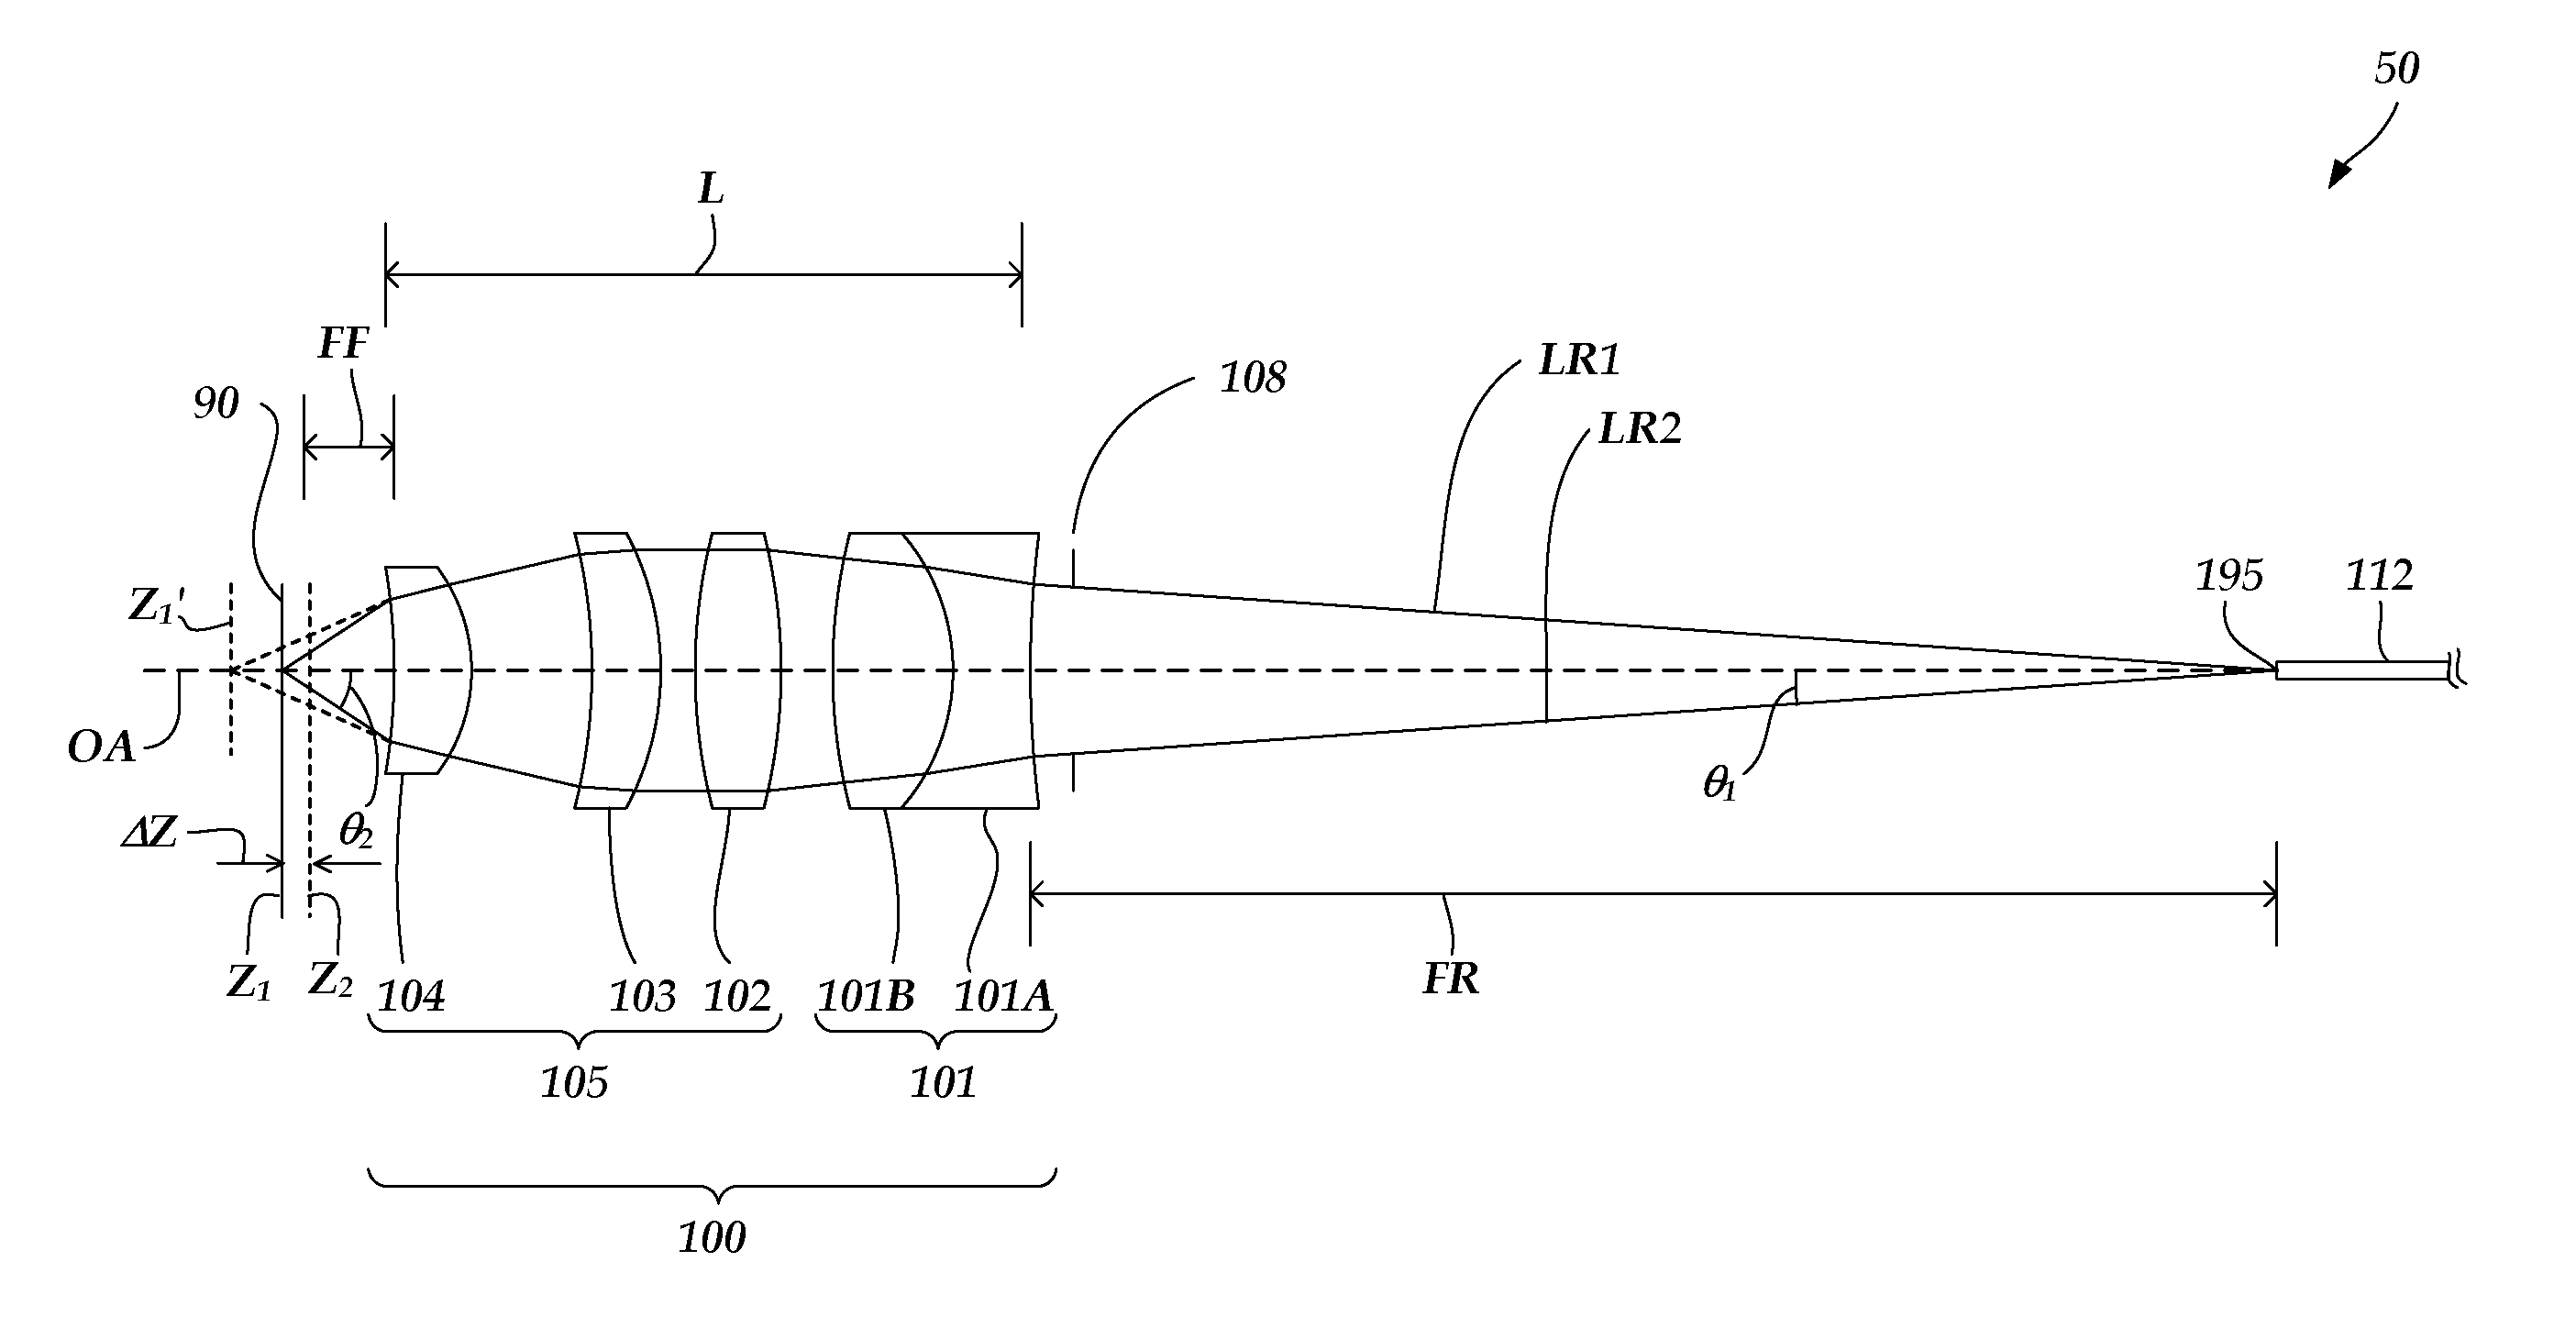 Lens configuration for a thermally compensated chromatic confocal point sensor